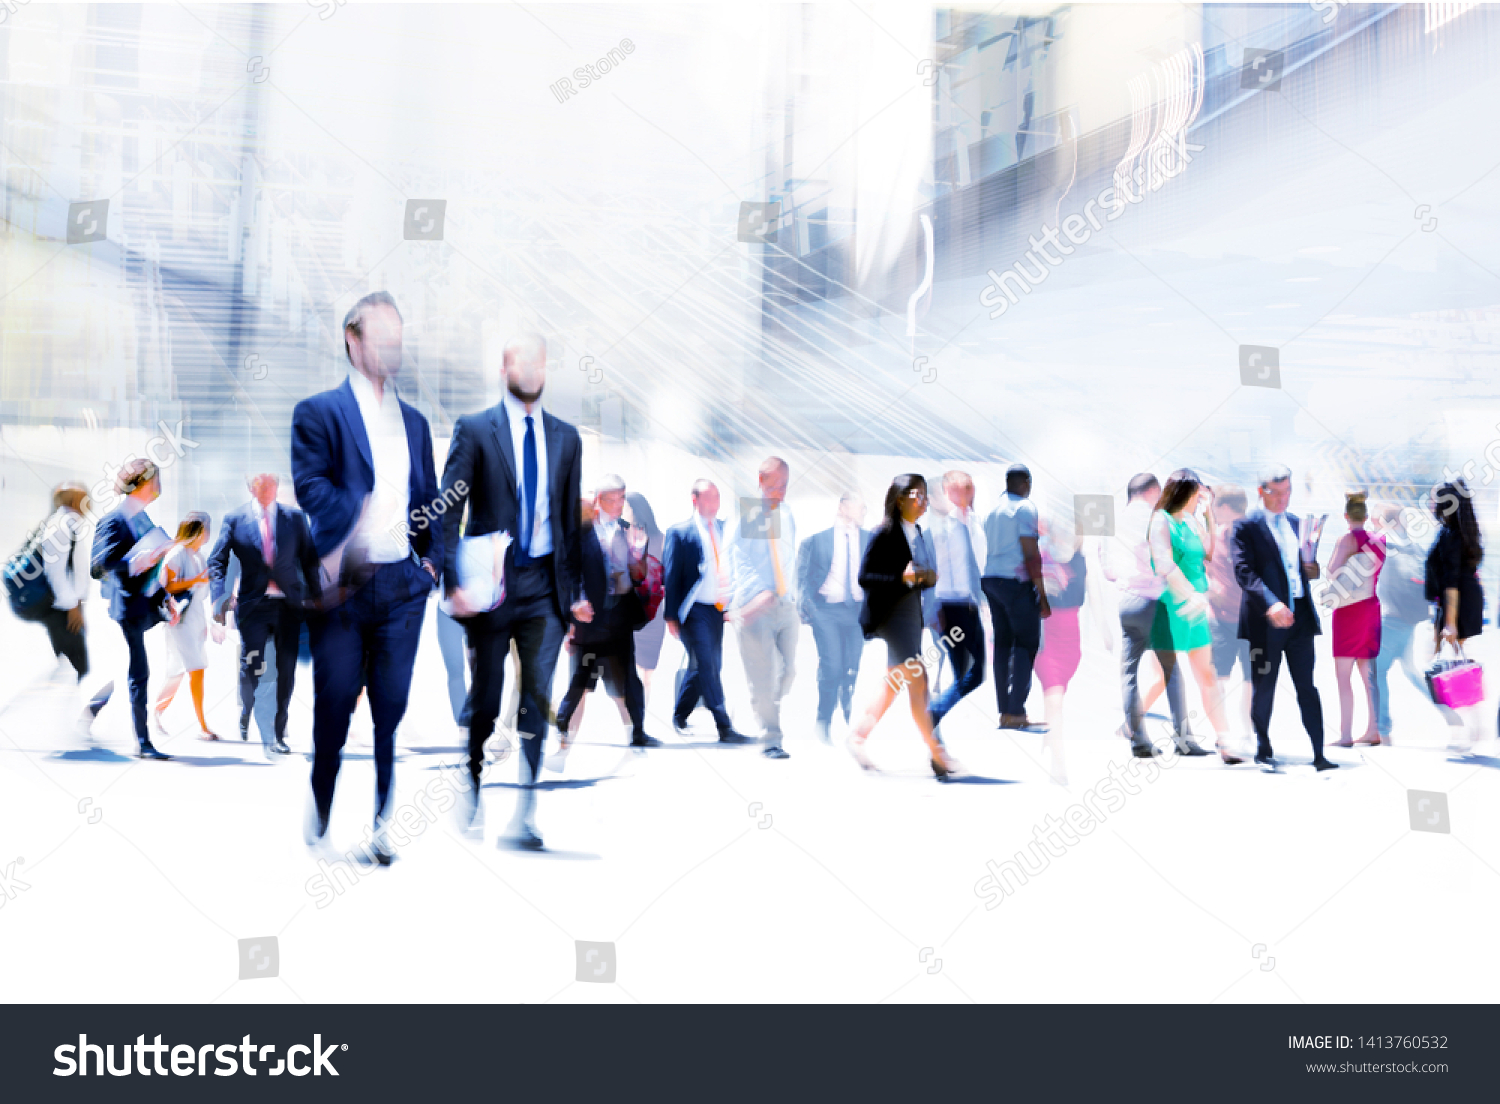 Business people rushing in the City of London against on the skyscrapers. Beautiful abstract blurred image representing modern business life, success, moving concept. #1413760532